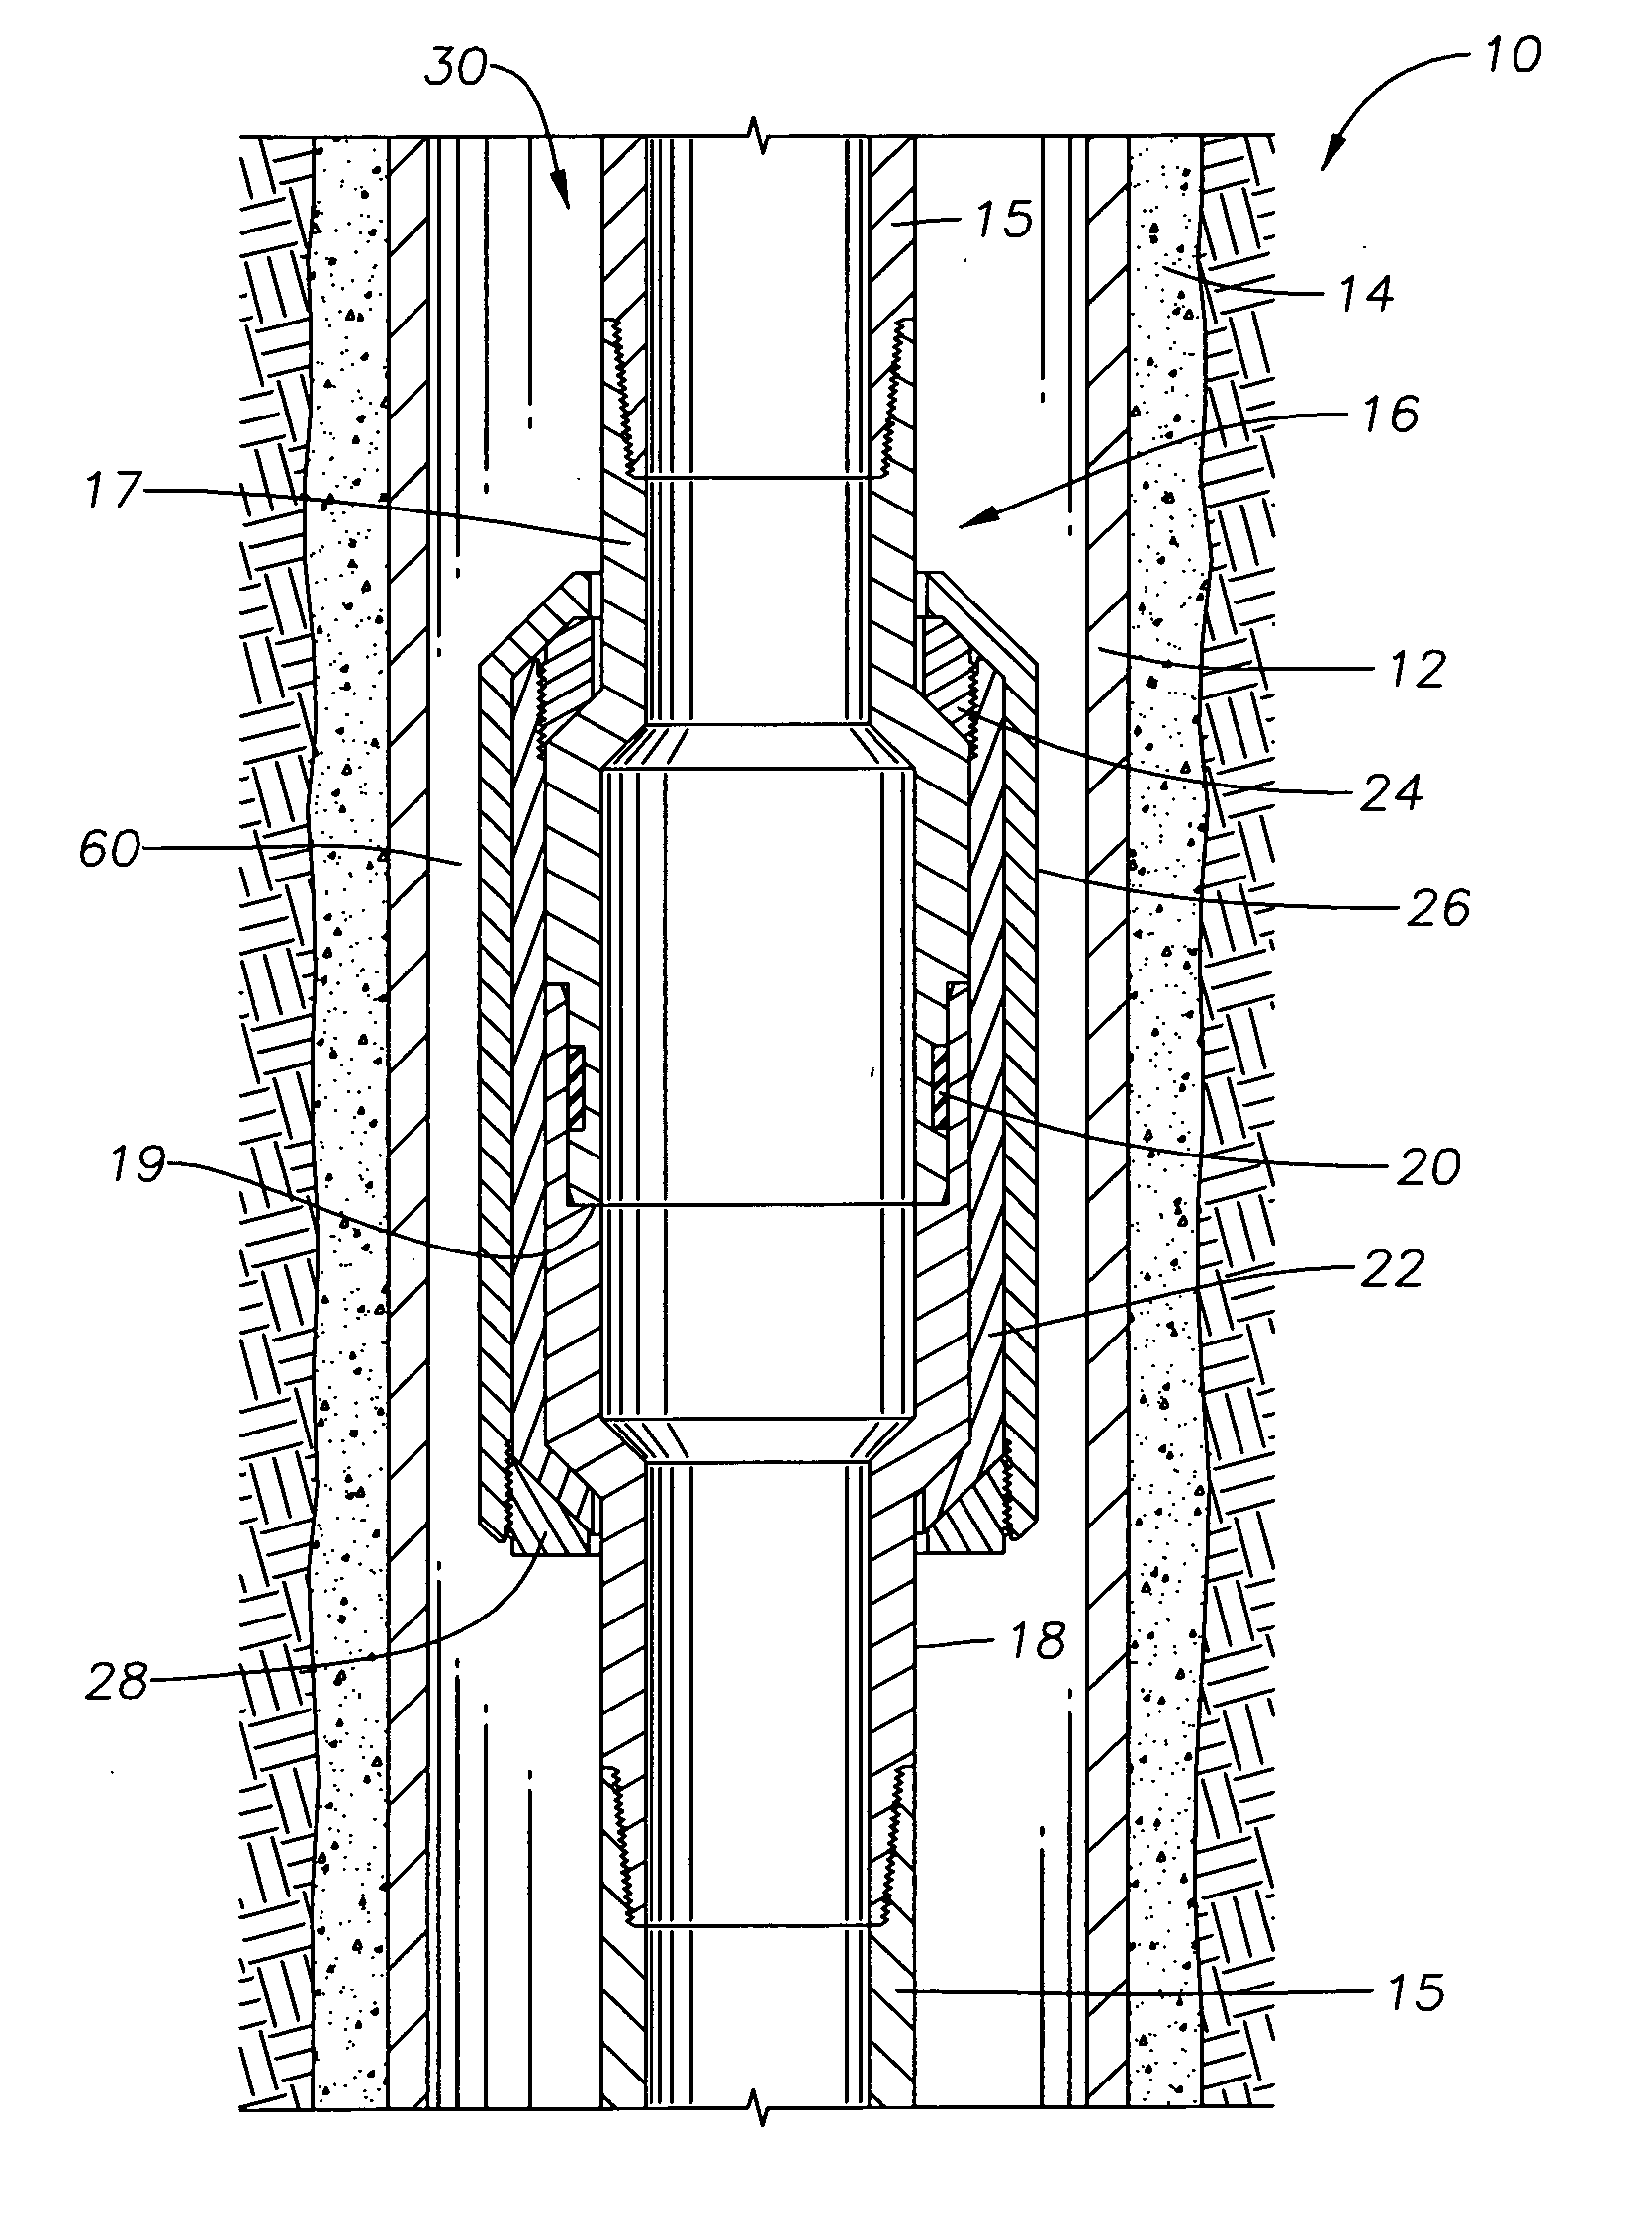 Laminate pressure containing body for a well tool